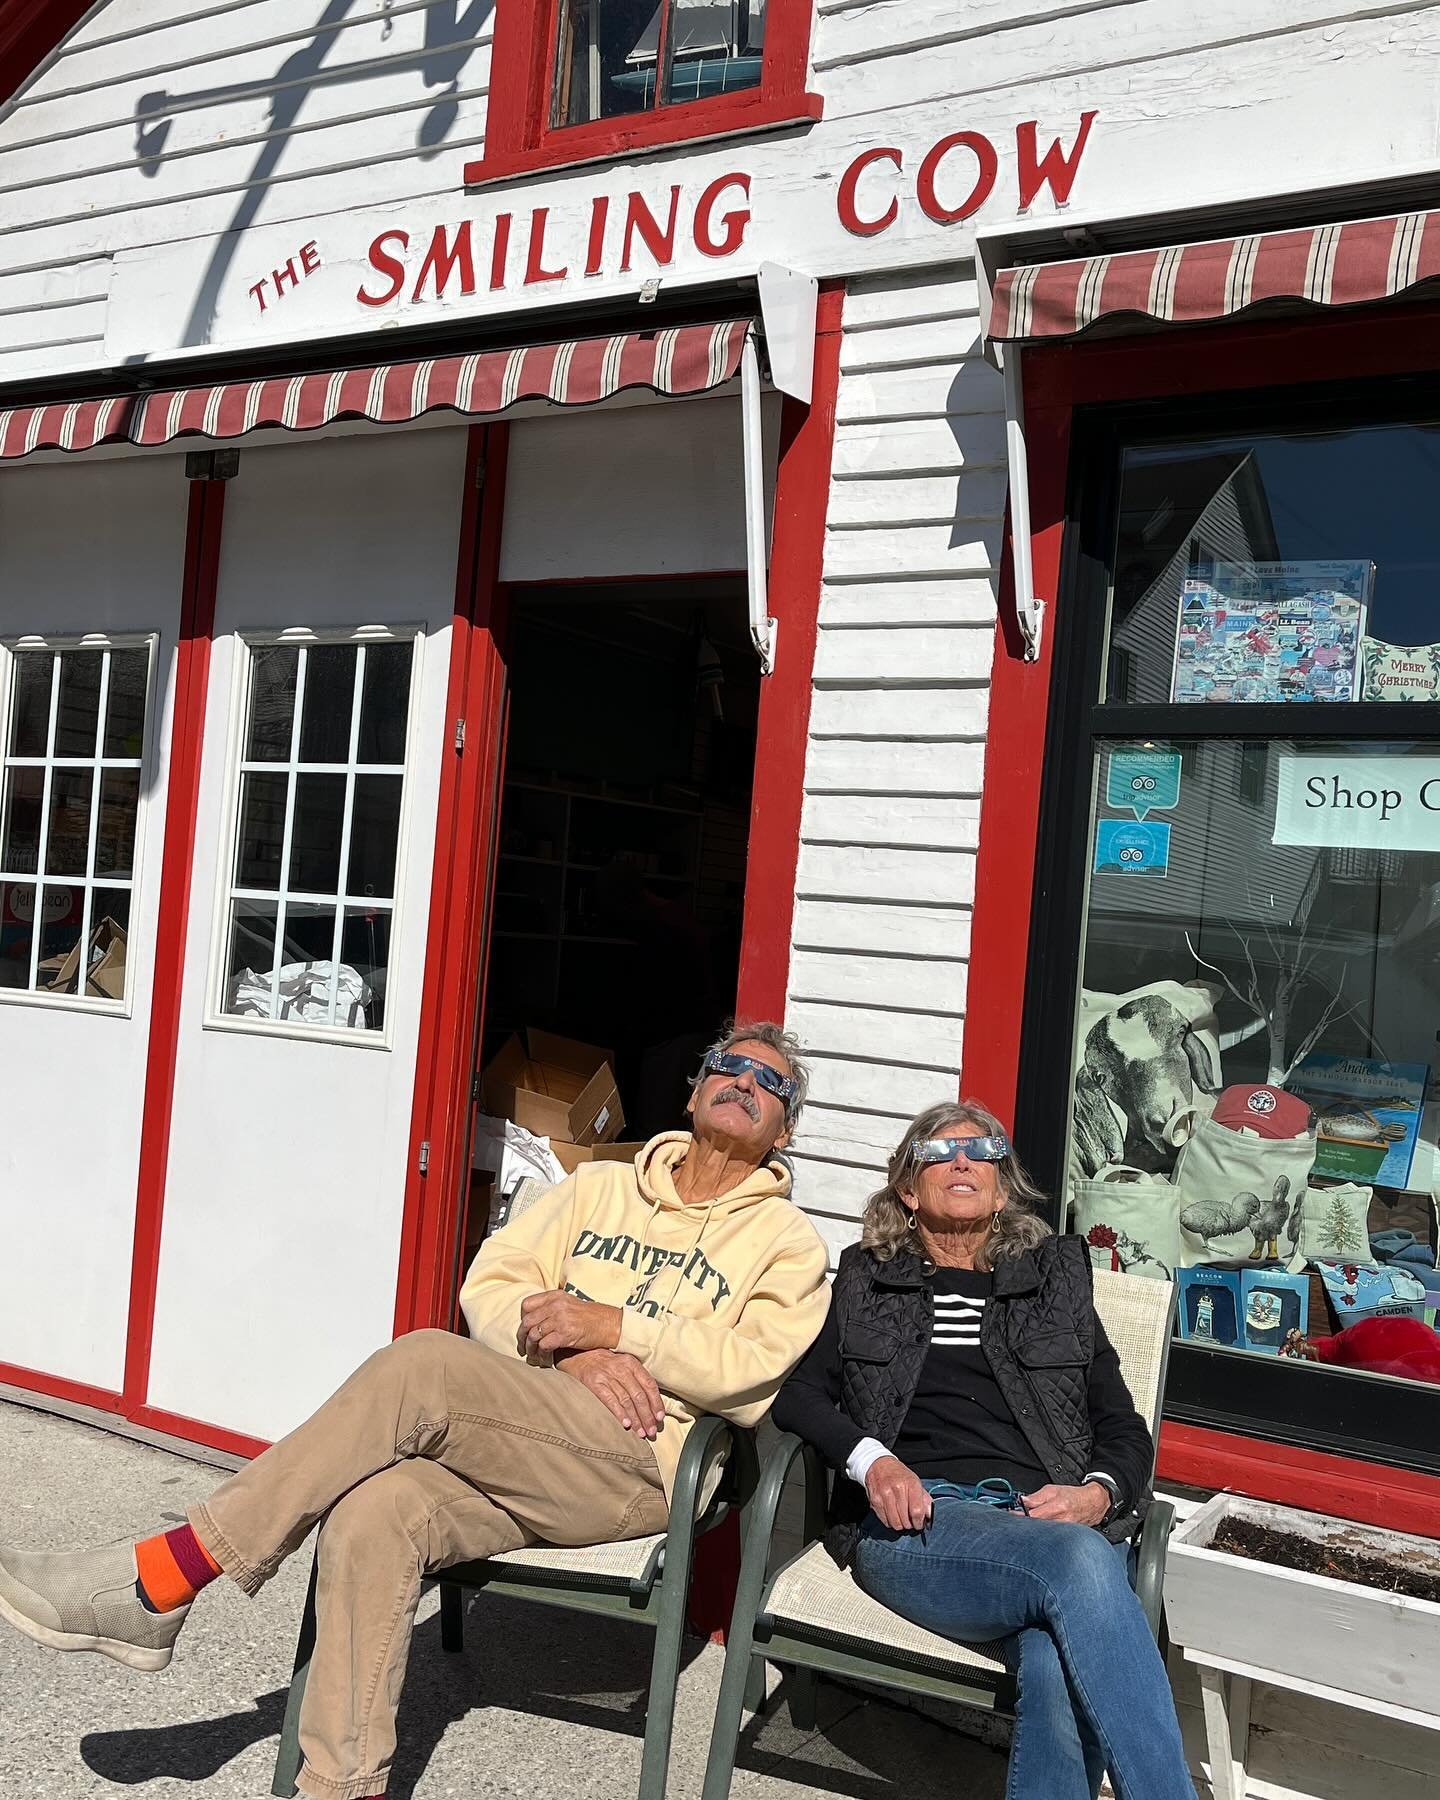 Front row seats for eclipse viewing! 

We took a break from getting ready for our 84th season - opening on April 27th!! - to marvel at this incredible sight over Main Street! 

#eclipse #camden #camdenmaine